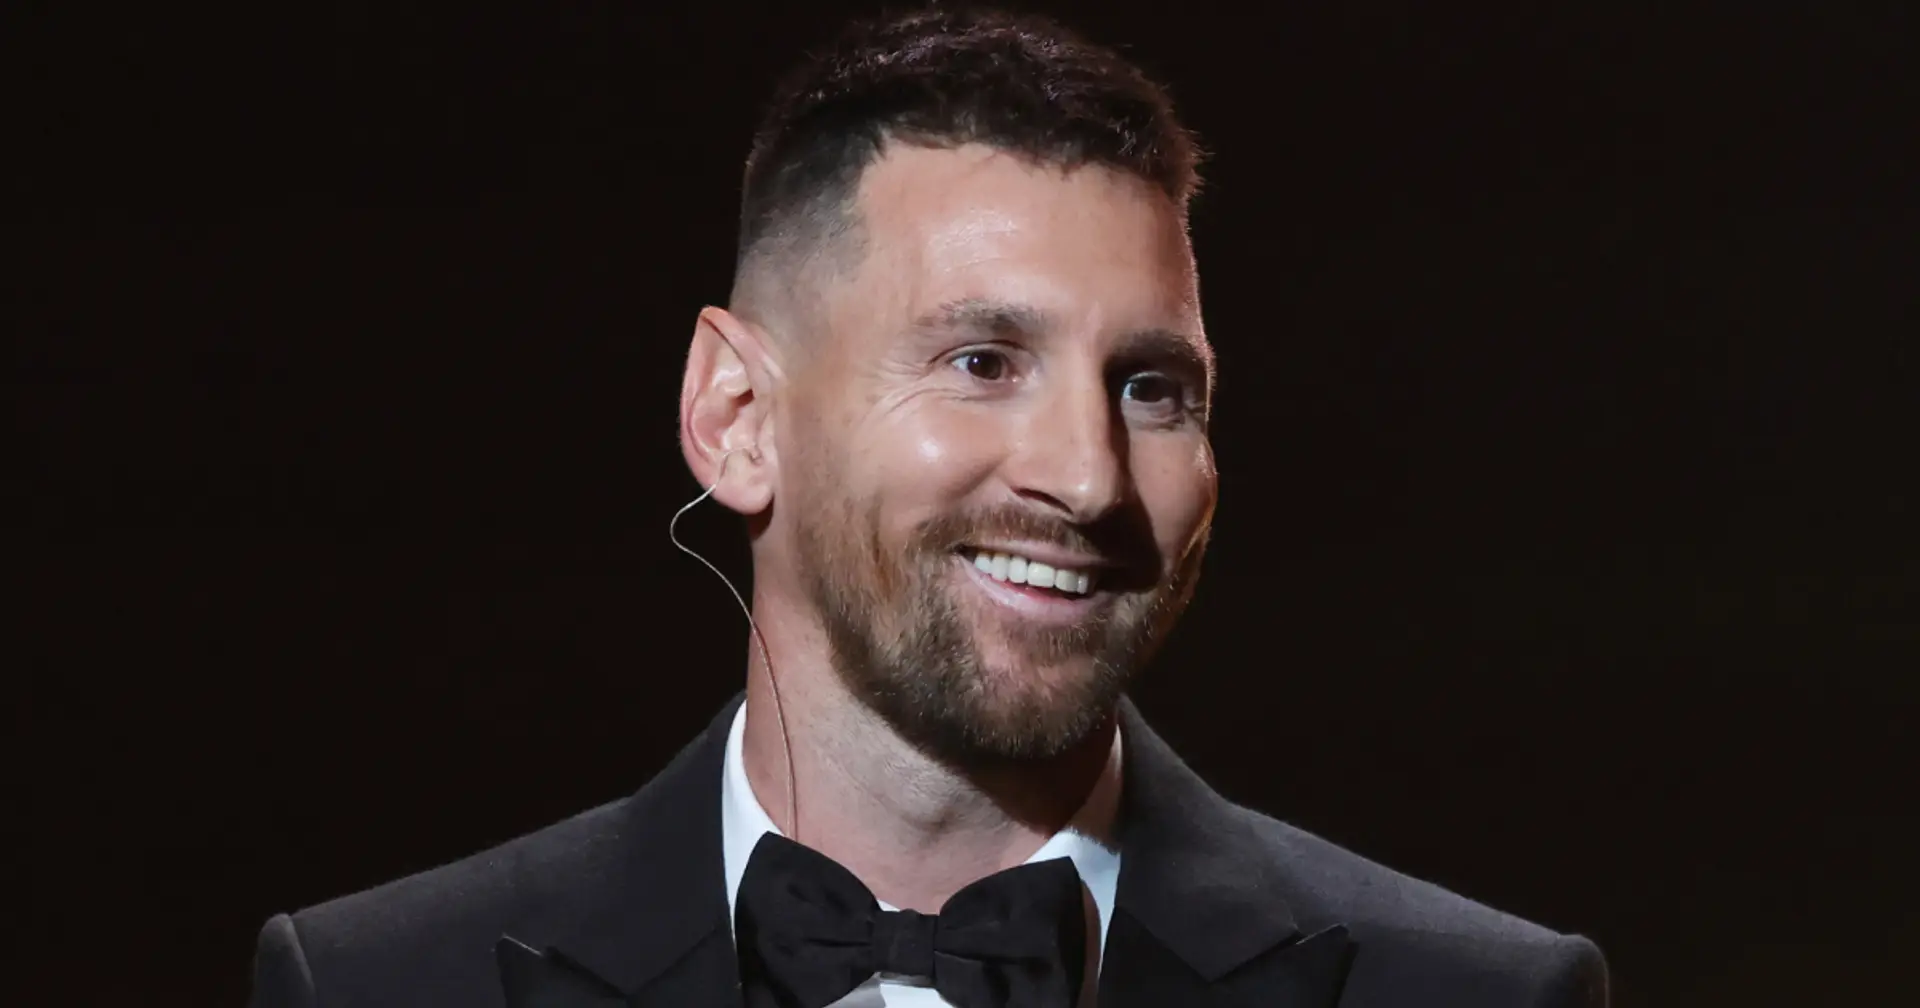 Naming 7 Leo Messi skills that could make him the GOAT in business